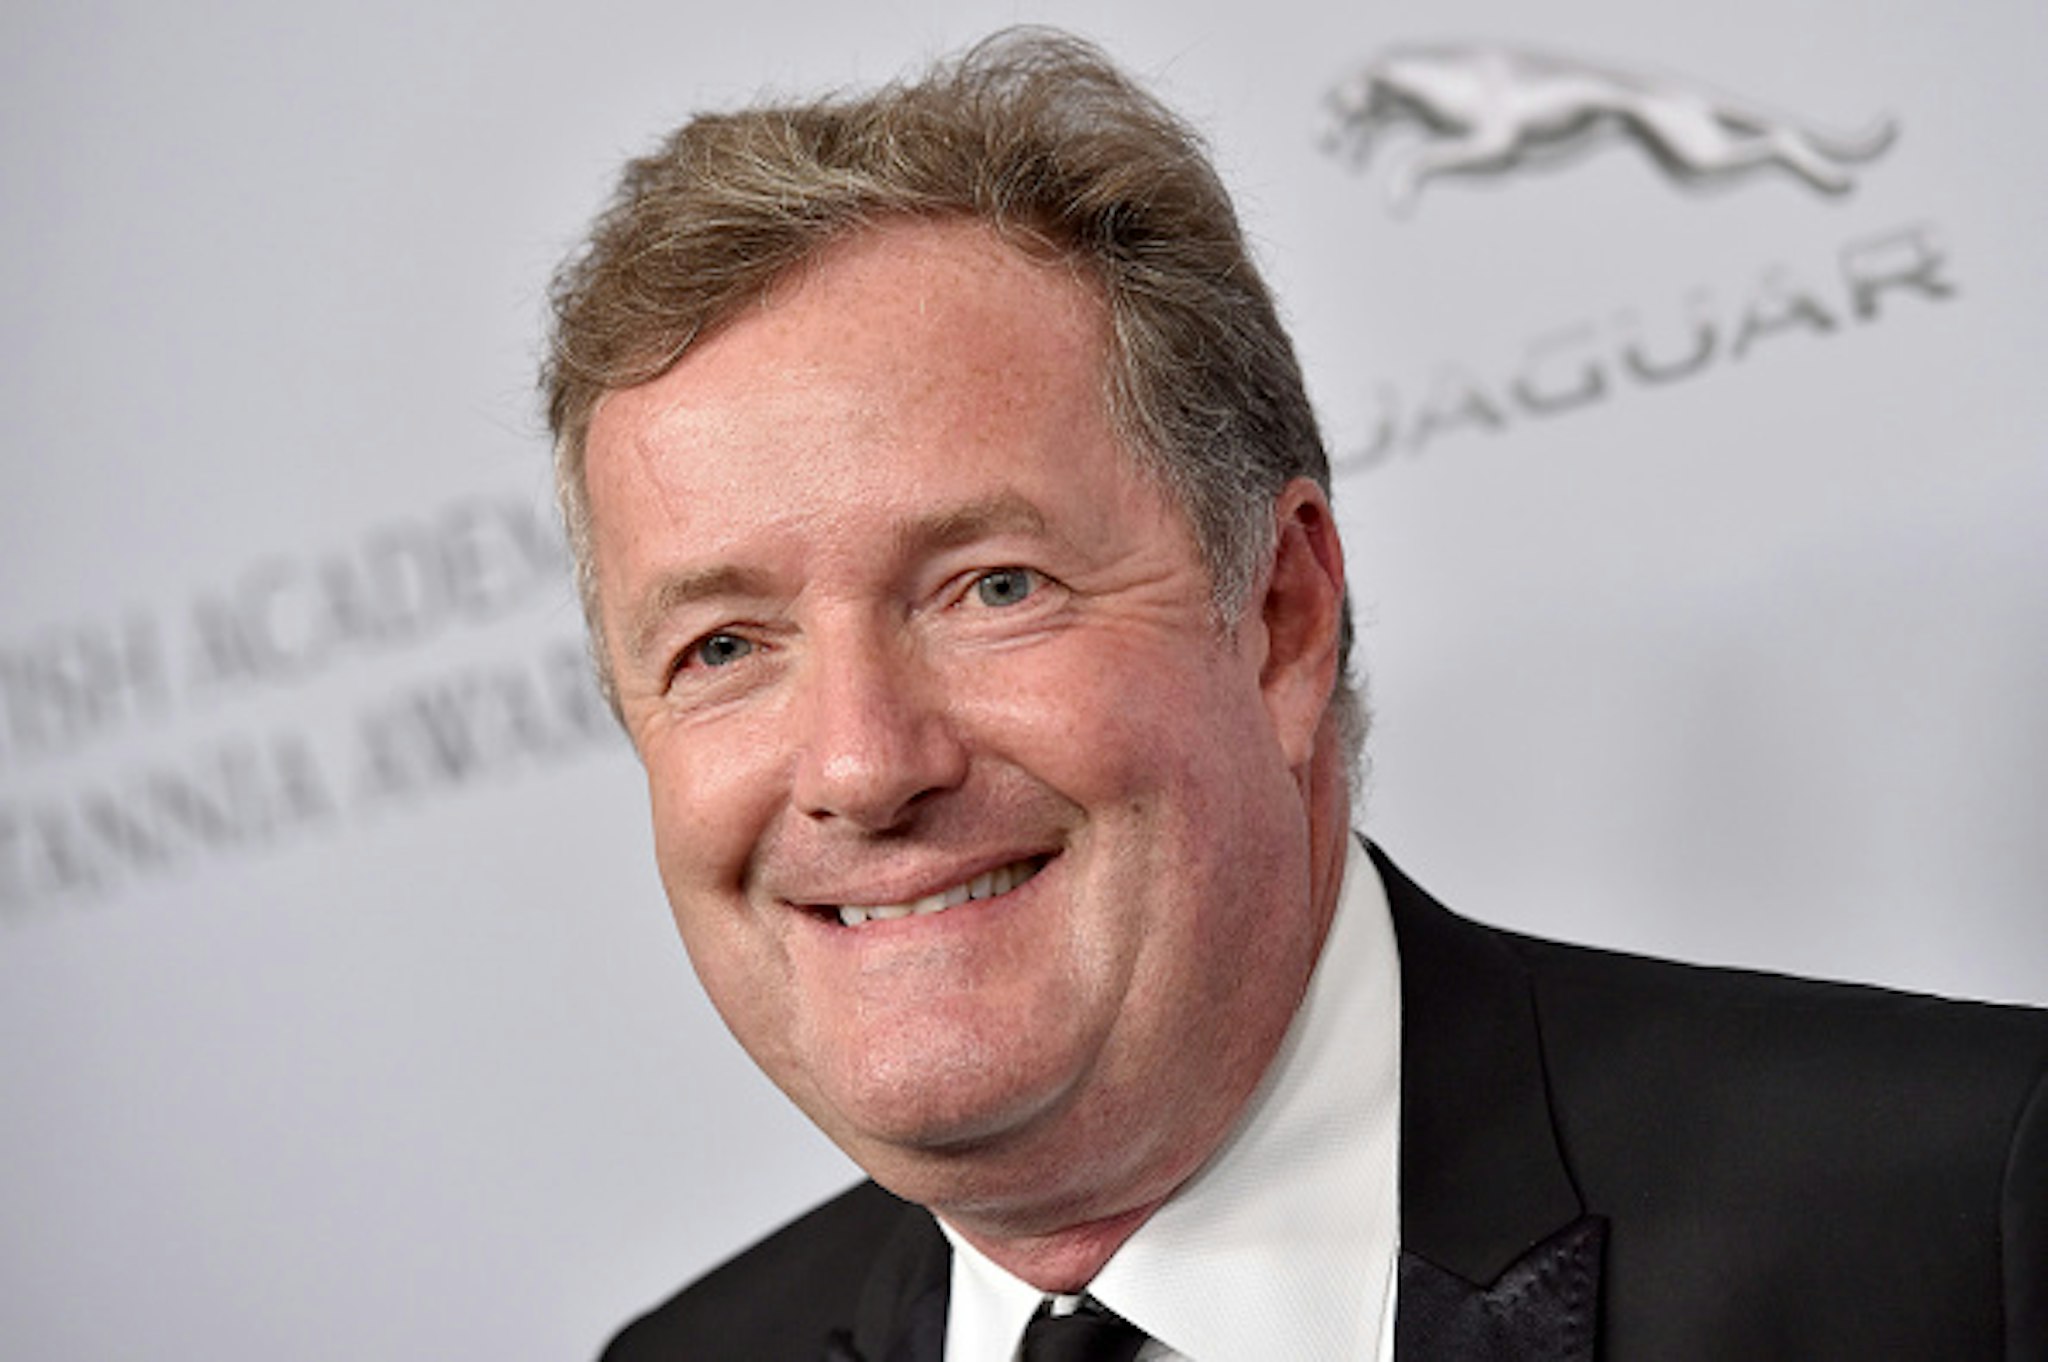 BEVERLY HILLS, CALIFORNIA - OCTOBER 25: Piers Morgan attends the 2019 British Academy Britannia Awards presented by American Airlines and Jaguar Land Rover at The Beverly Hilton Hotel on October 25, 2019 in Beverly Hills, California.